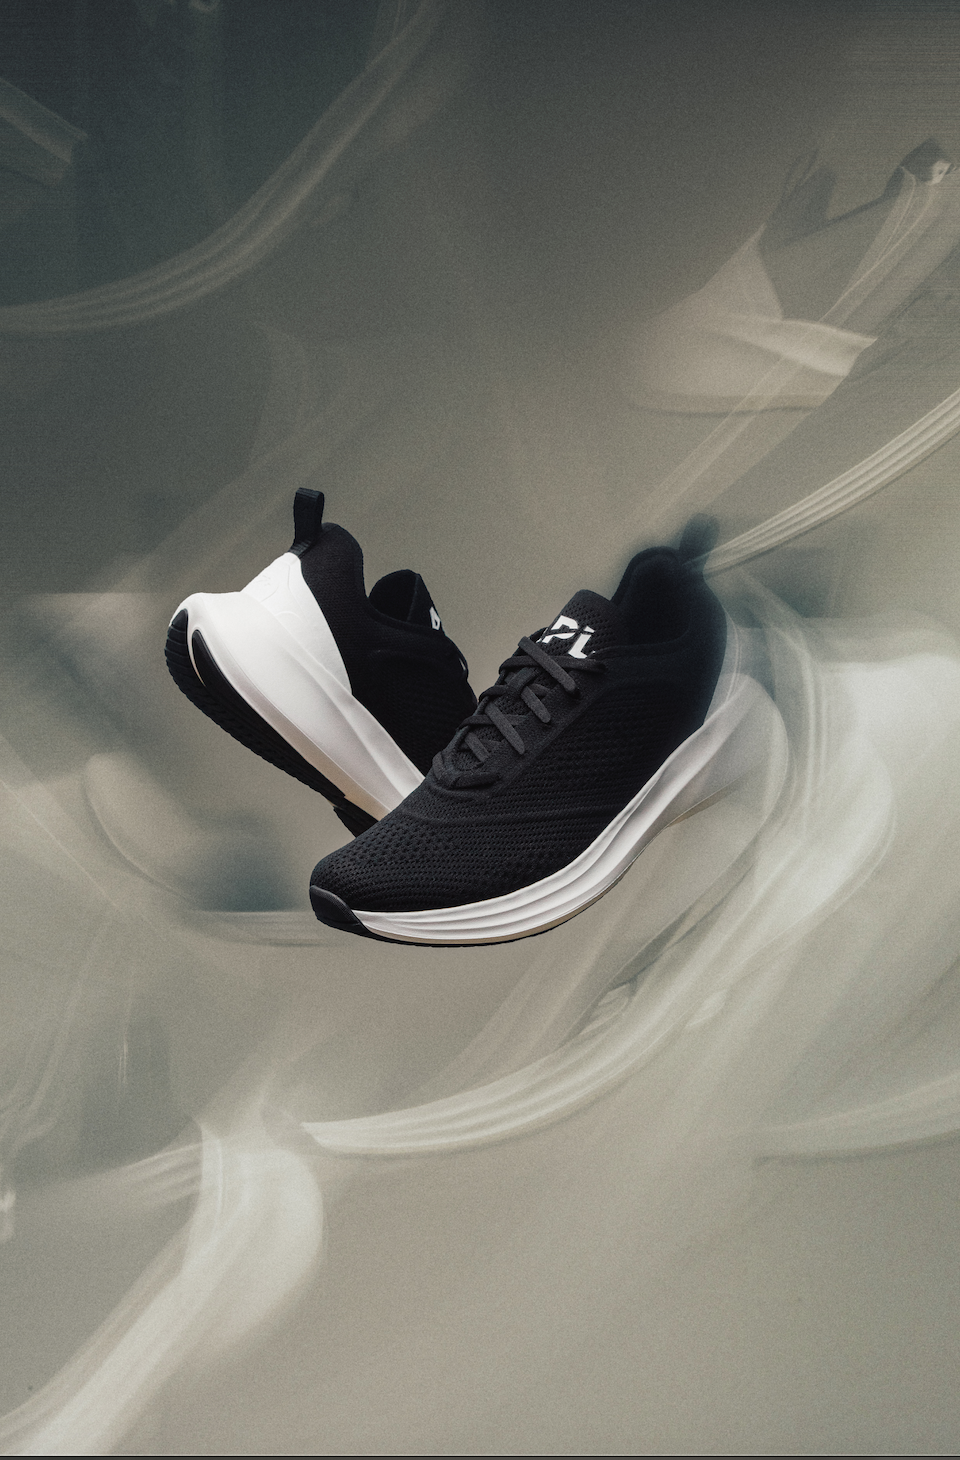 APL’s New TechLoom Sneaker Might be the Most Versatile One Yet